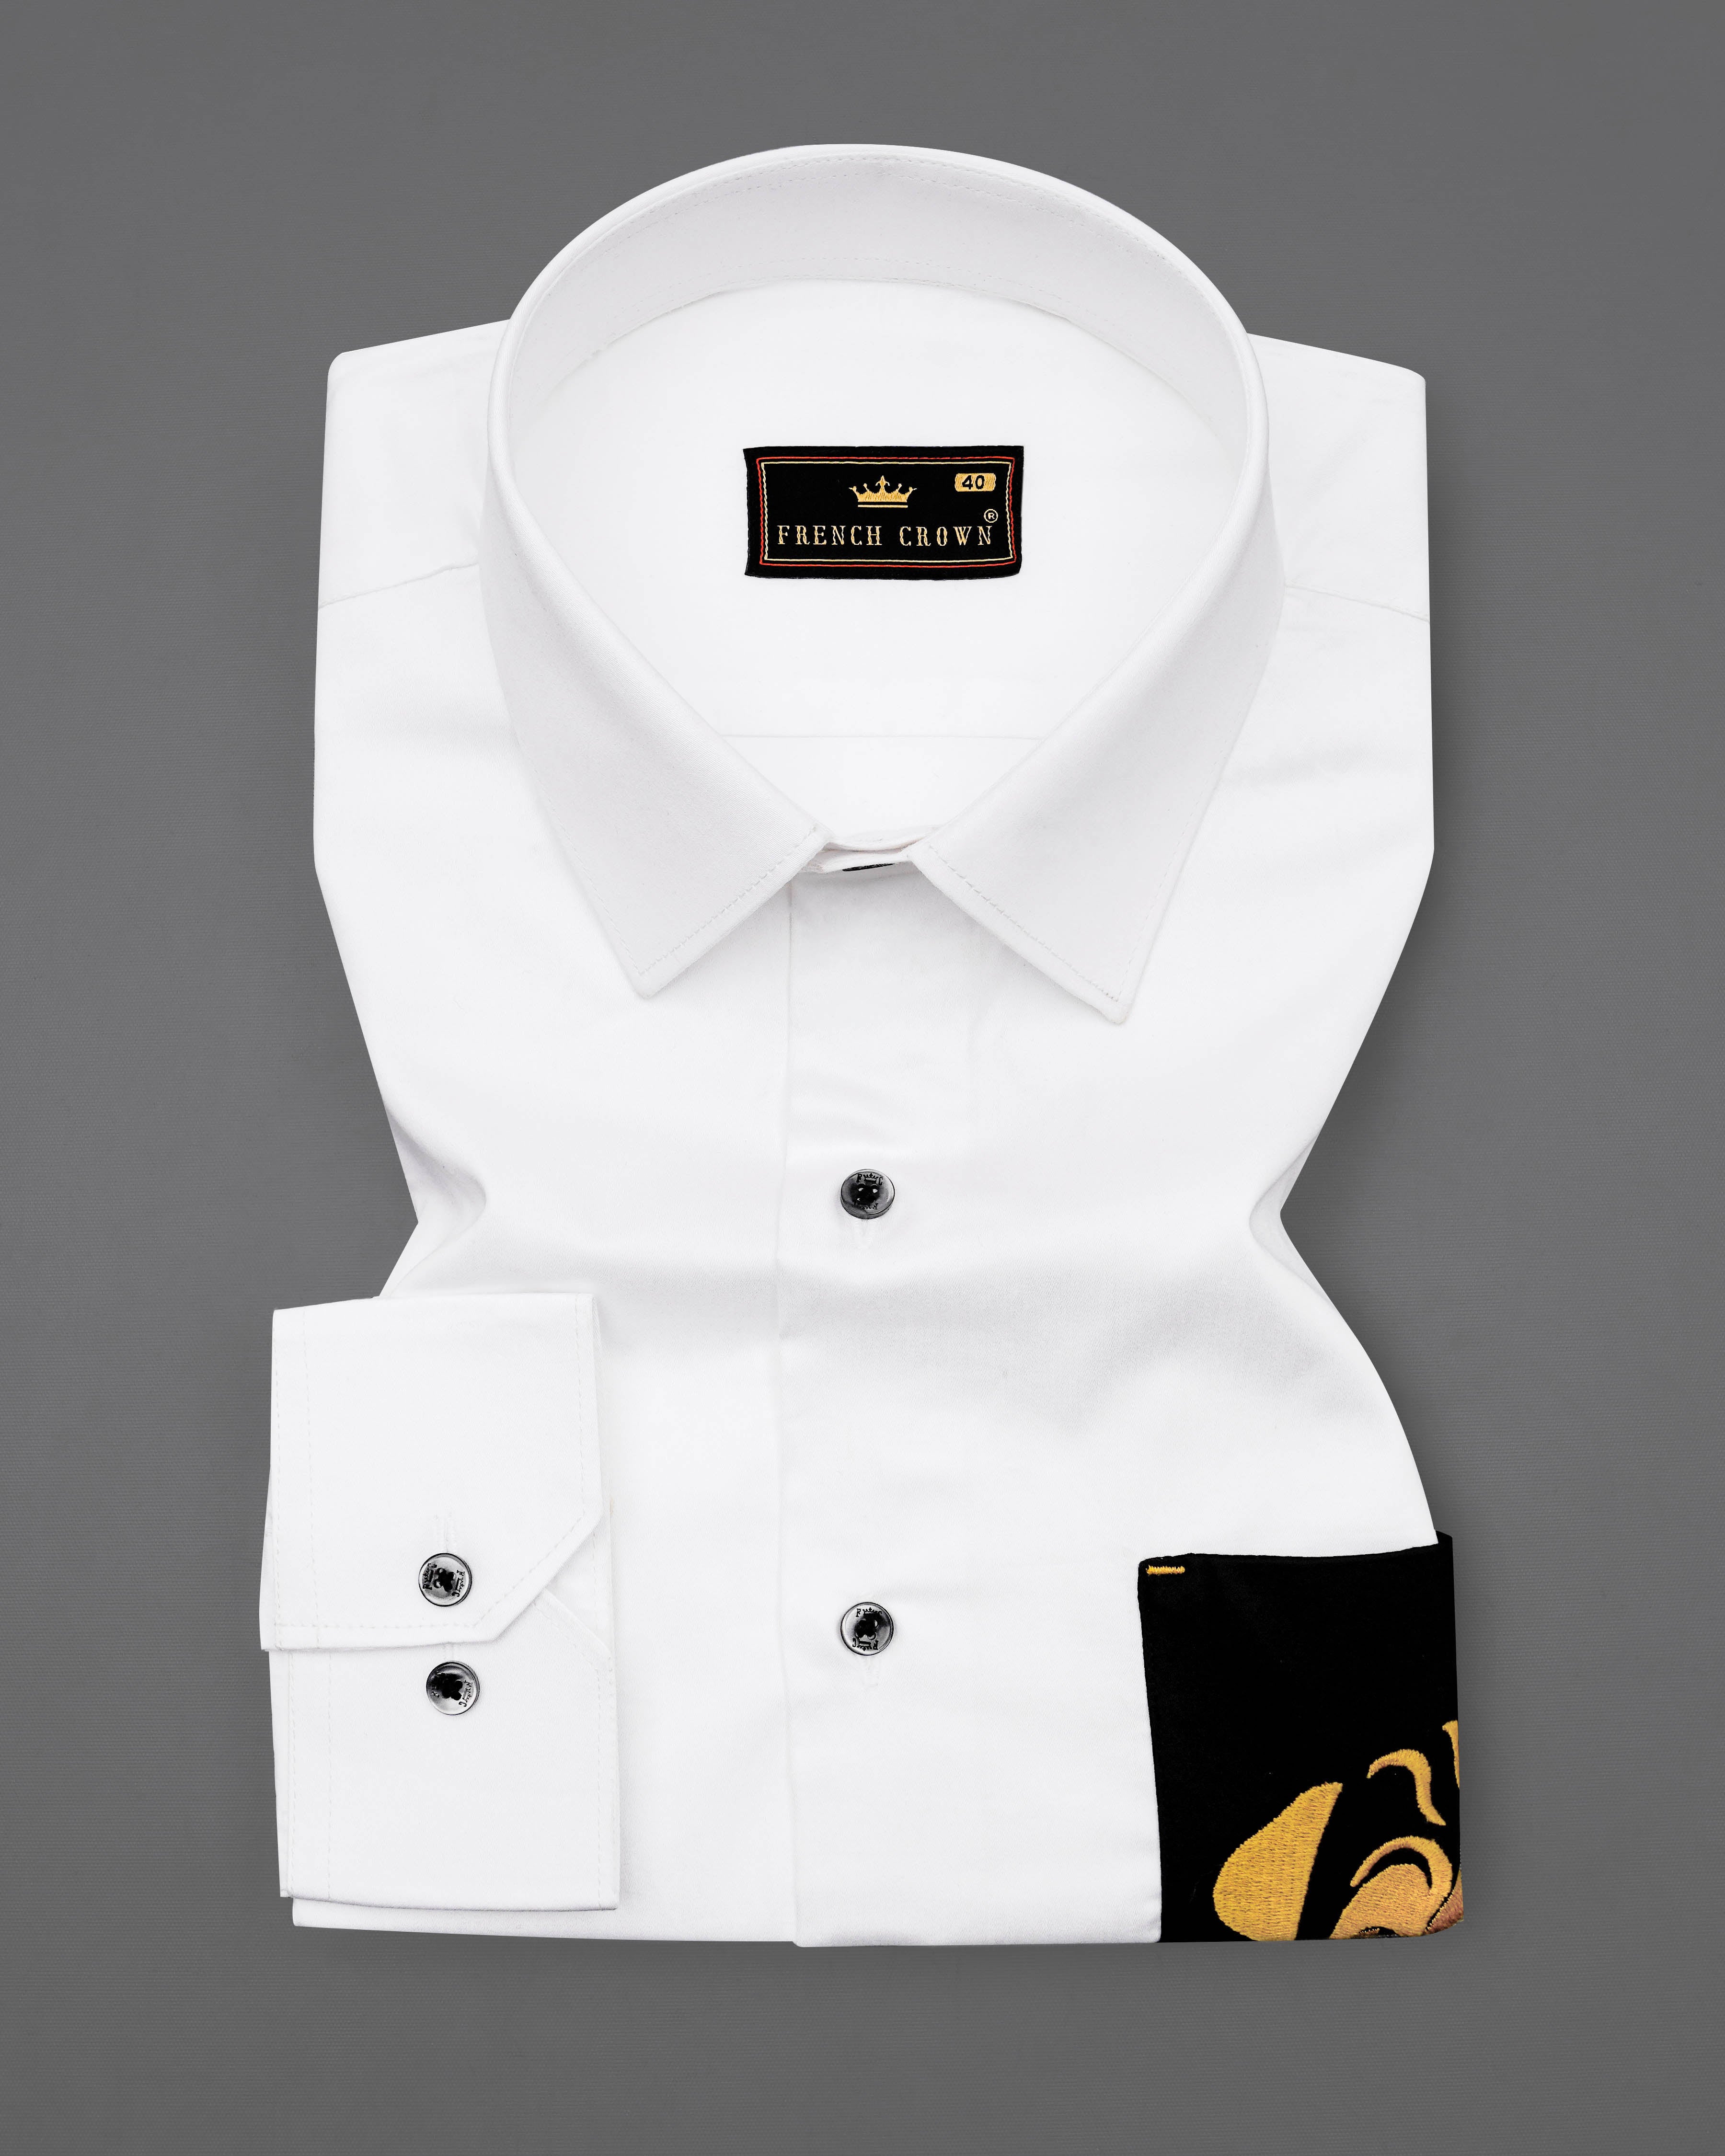 Bright White Subtle Sheen with Black Pocket and Puppy Embroidered Super Soft Premium Cotton Shirt 1062-BLK-P492-38,1062-BLK-P492-H-38,1062-BLK-P492-39,1062-BLK-P492-H-39,1062-BLK-P492-40,1062-BLK-P492-H-40,1062-BLK-P492-42,1062-BLK-P492-H-42,1062-BLK-P492-44,1062-BLK-P492-H-44,1062-BLK-P492-46,1062-BLK-P492-H-46,1062-BLK-P492-48,1062-BLK-P492-H-48,1062-BLK-P492-50,1062-BLK-P492-H-50,1062-BLK-P492-52,1062-BLK-P492-H-52